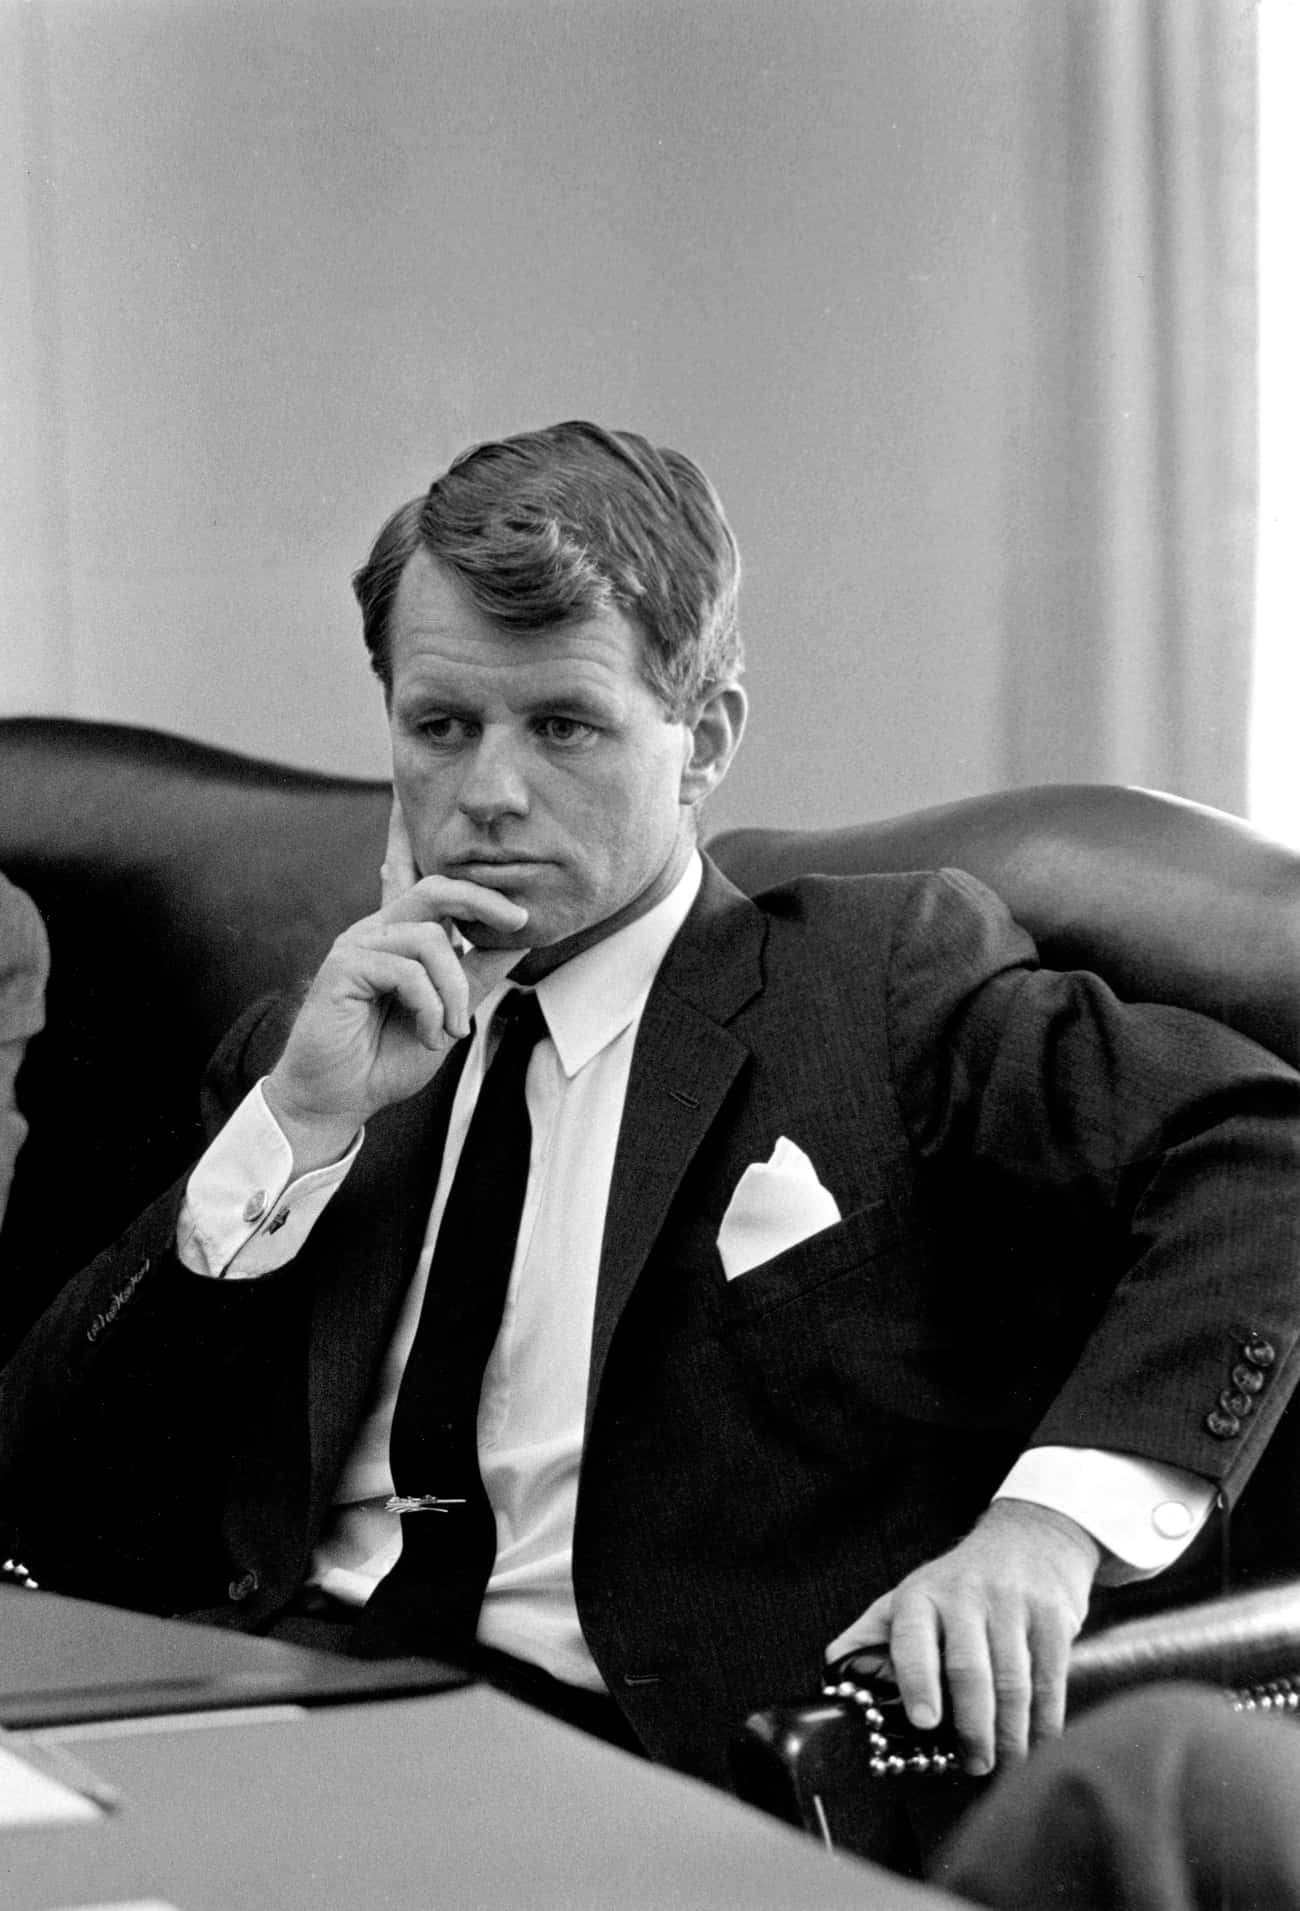 Bobby Kennedy Began As A Conservative Who Worked For Joseph McCarthy